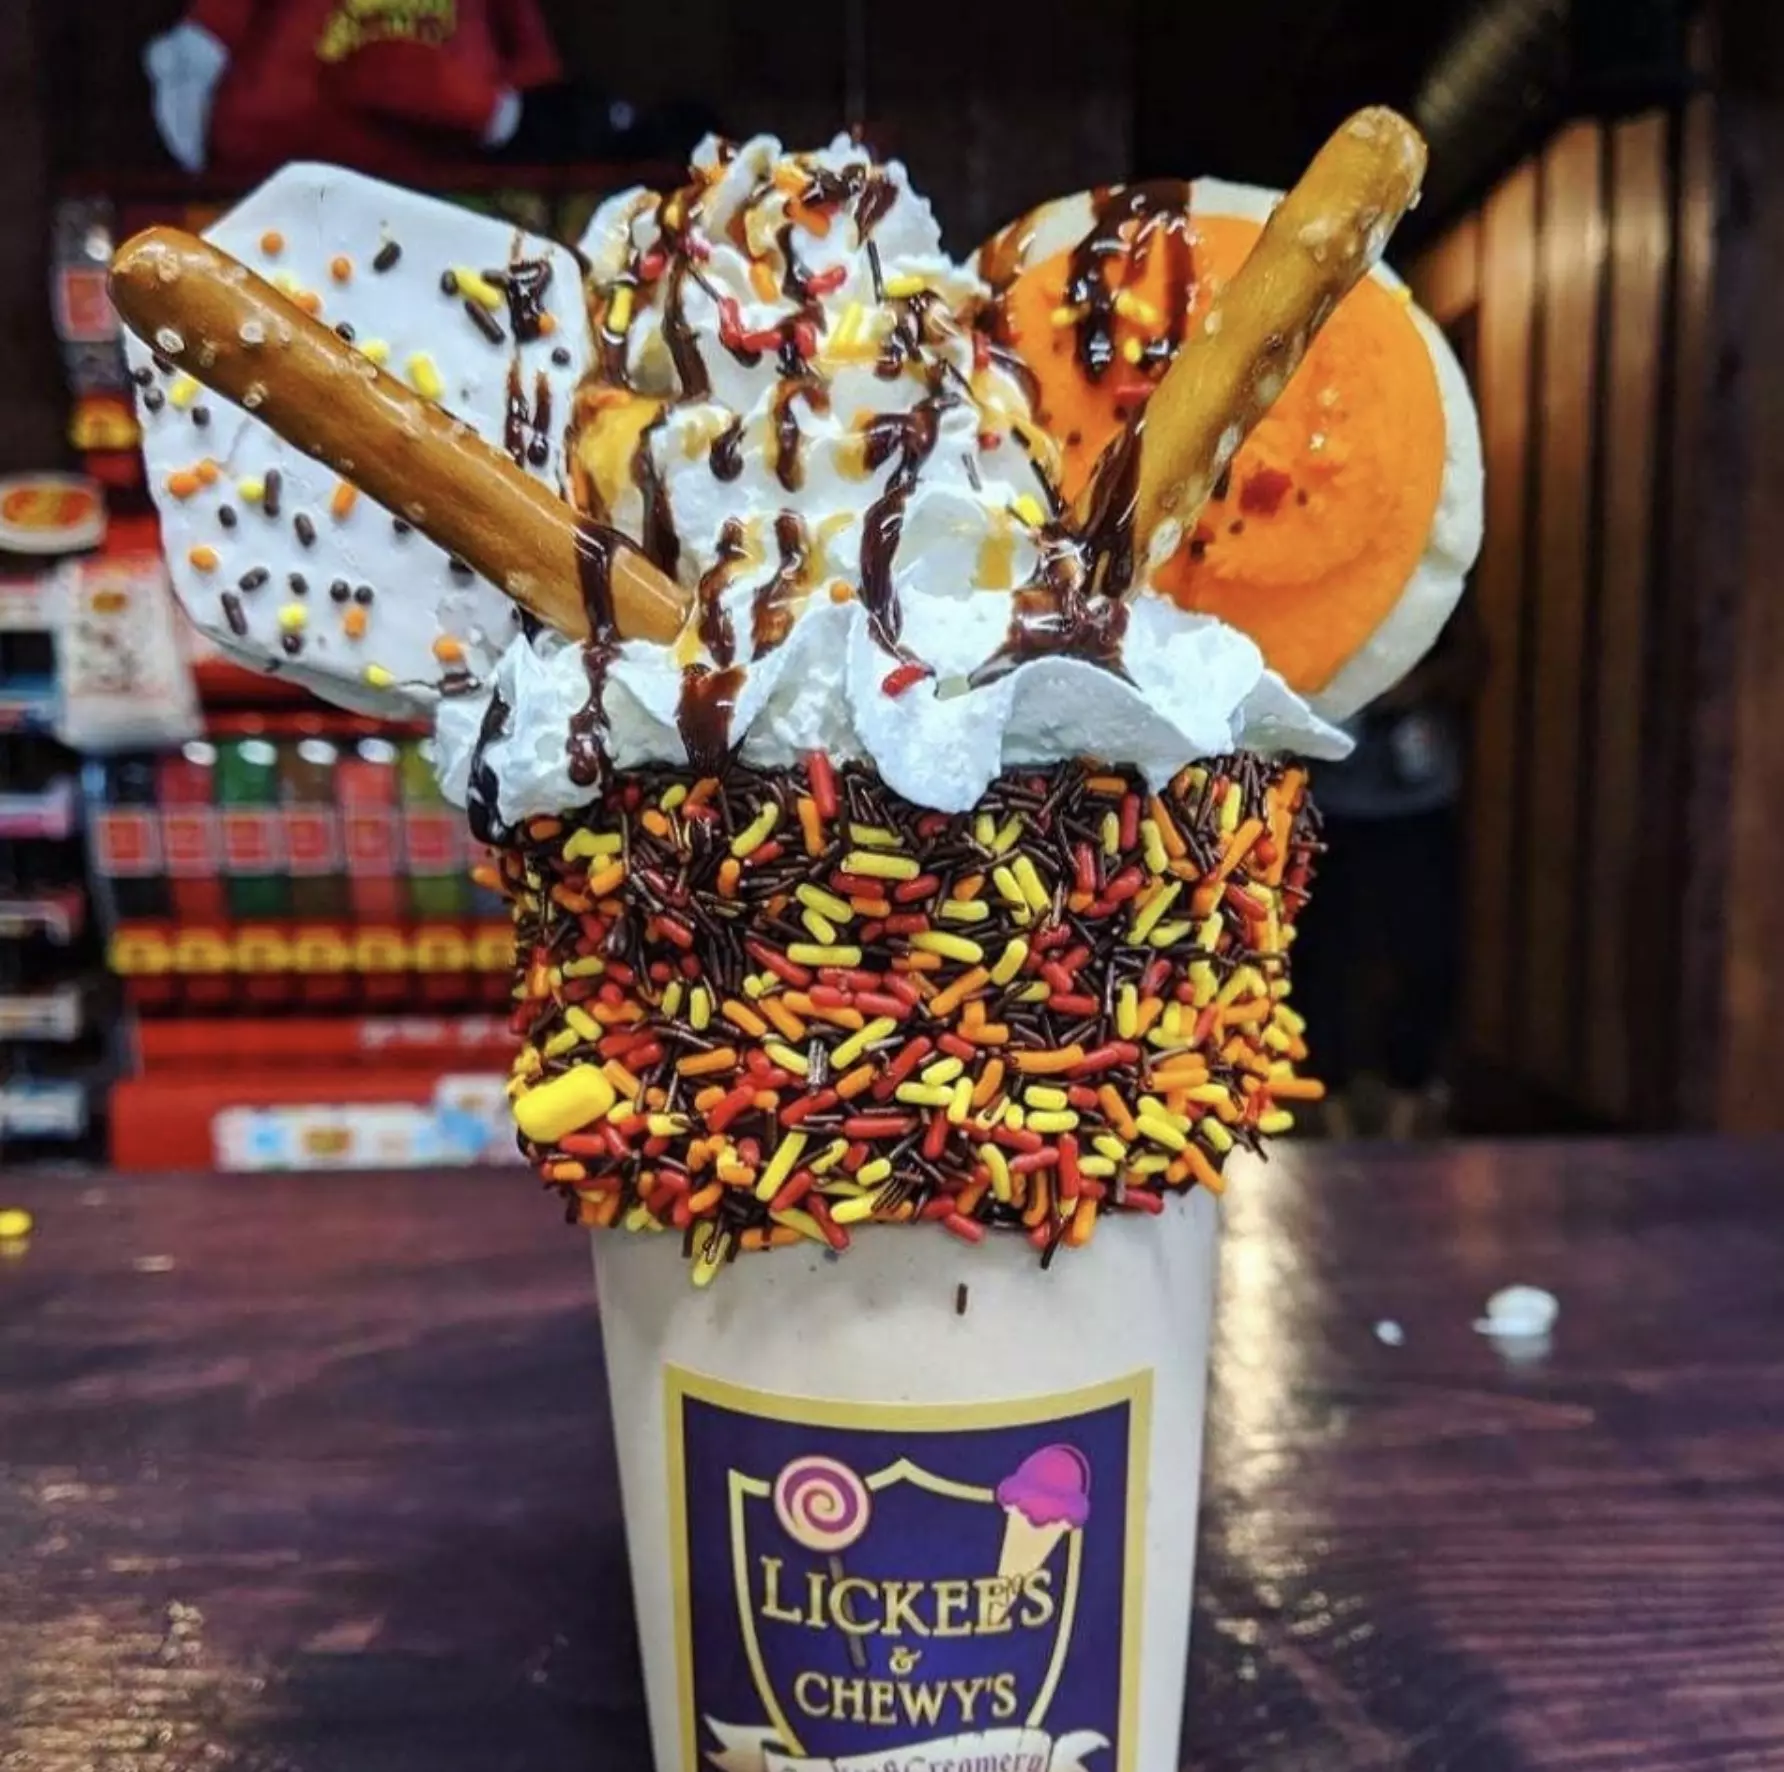 Try the New Butterfly King Shake at Lickee's & Chewy's in NH